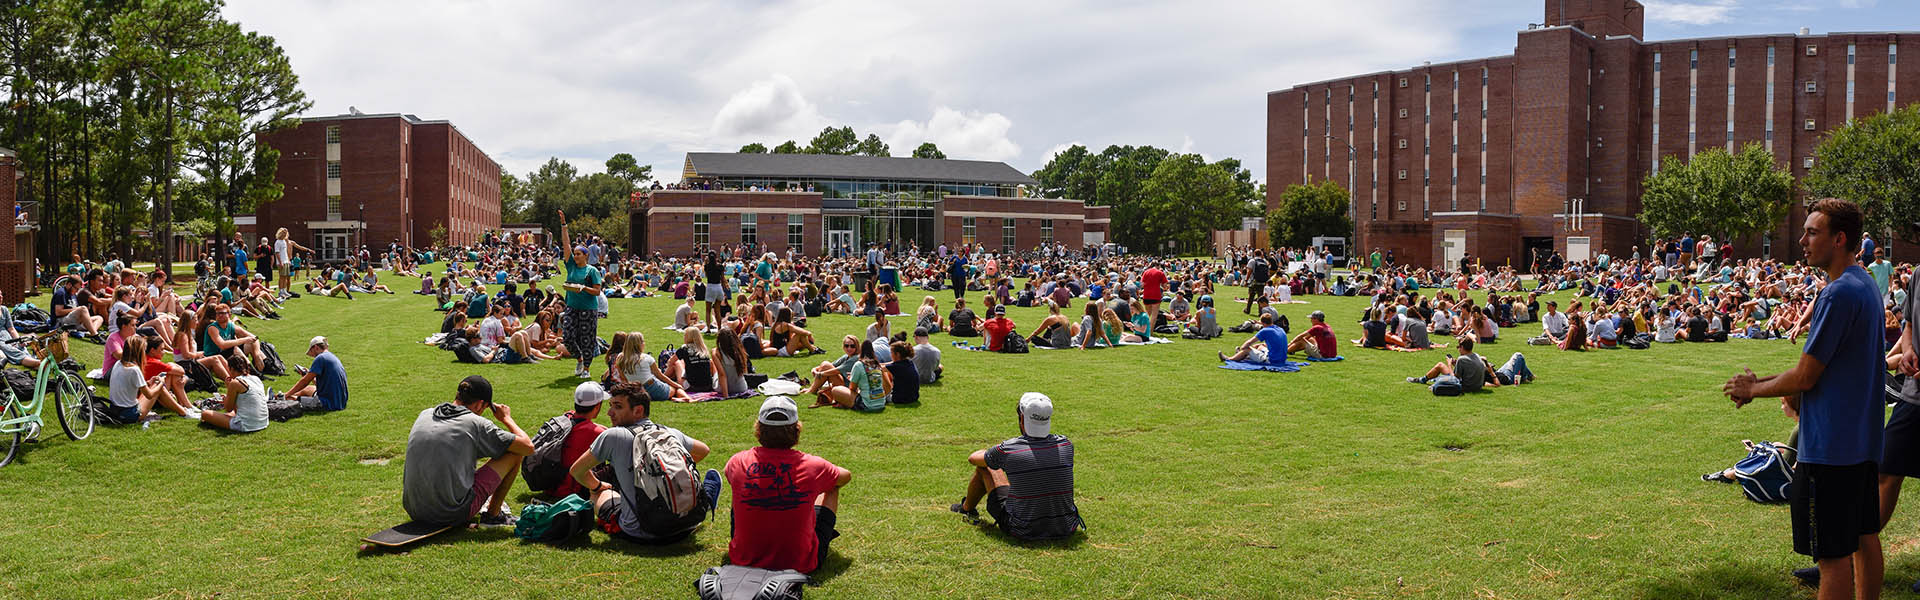 Groups of students on the lawn 